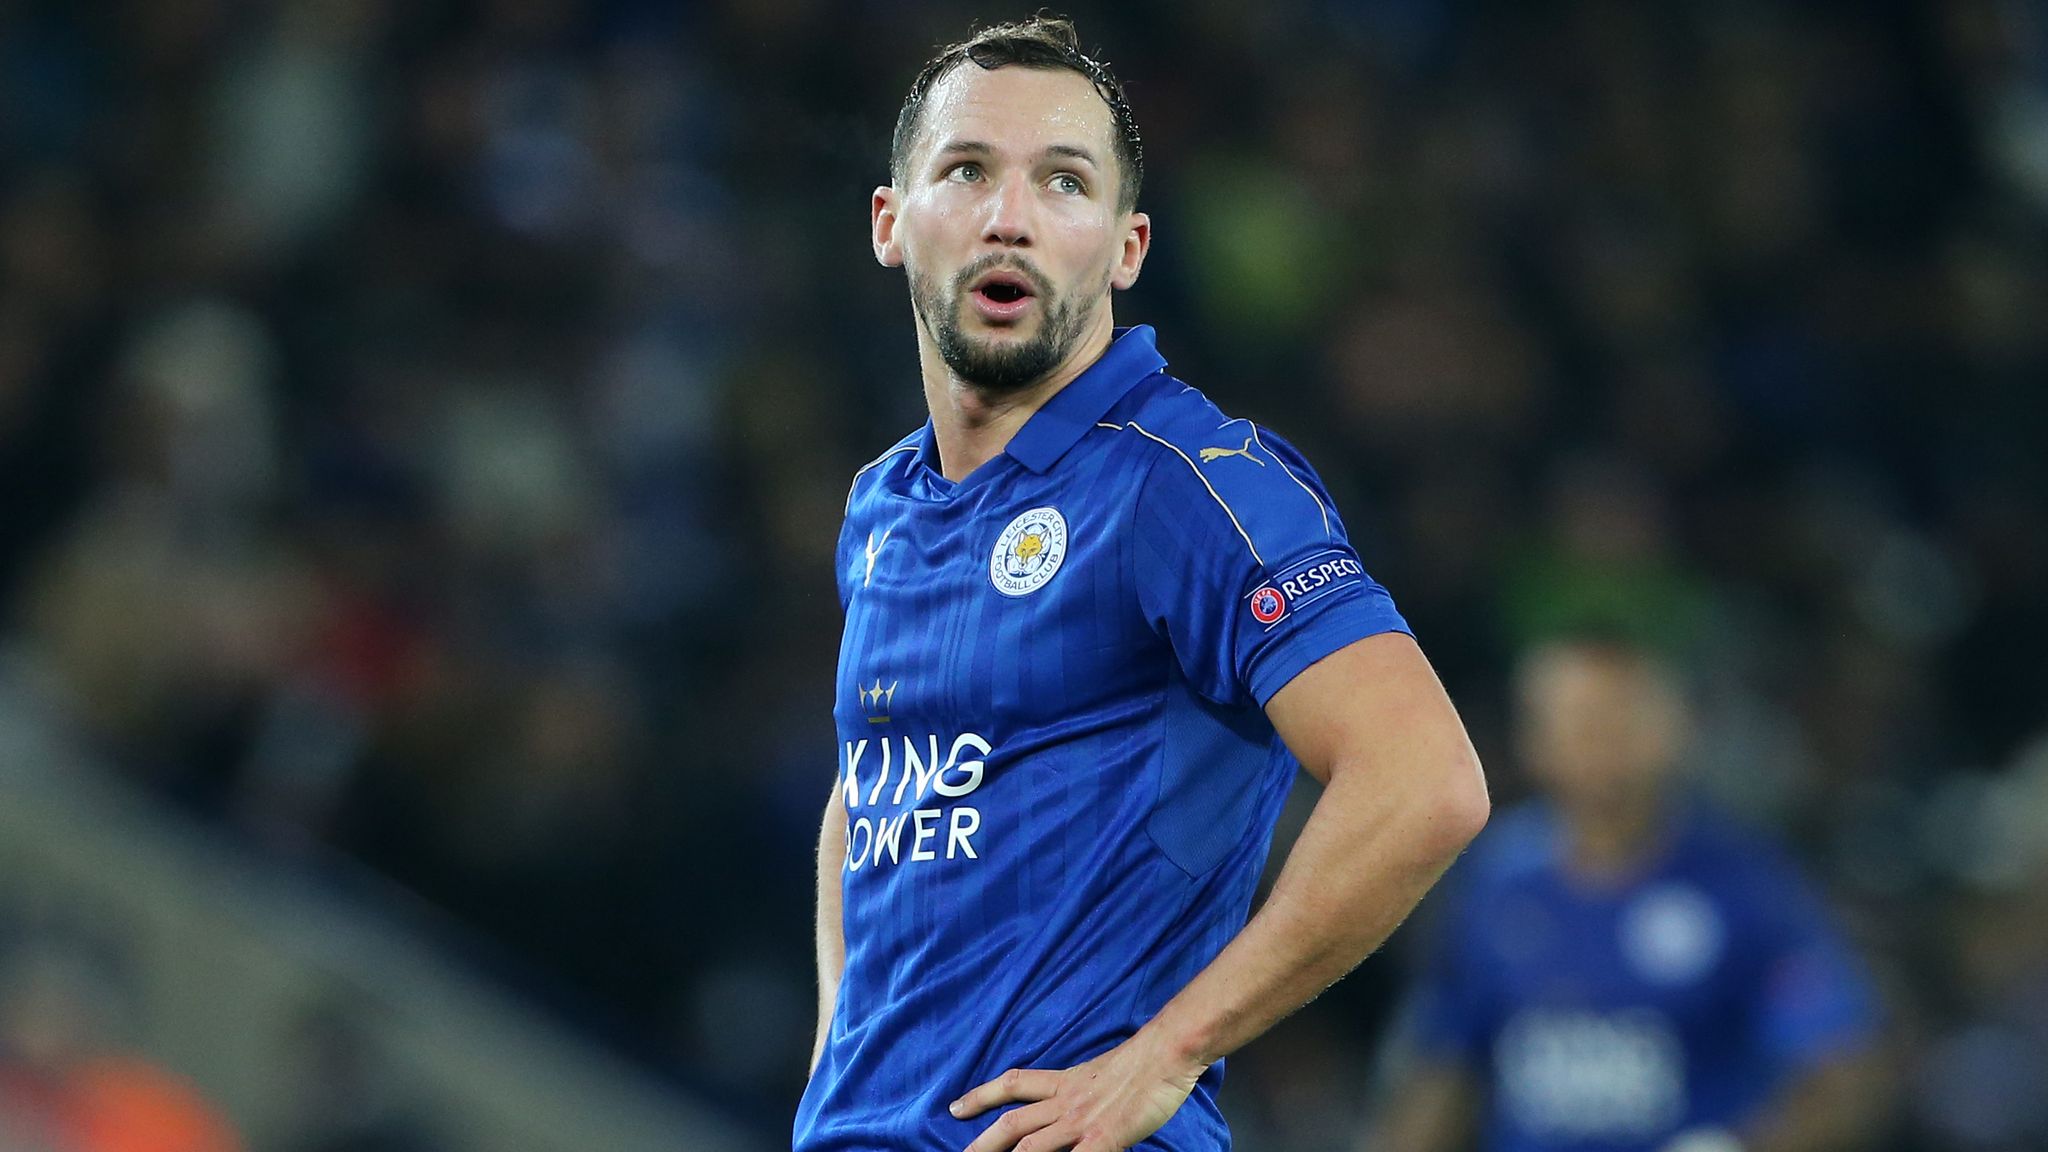 November 22, 2016 - Leicester, United Kingdom - Leicester&#39;s Danny Drinkwater in action during the Champions League group B match at the King Power Stadium, Leicester. Picture date November 22nd, 2016 Pic David Klein/Sportimage (Cal Sport Media via AP Images)